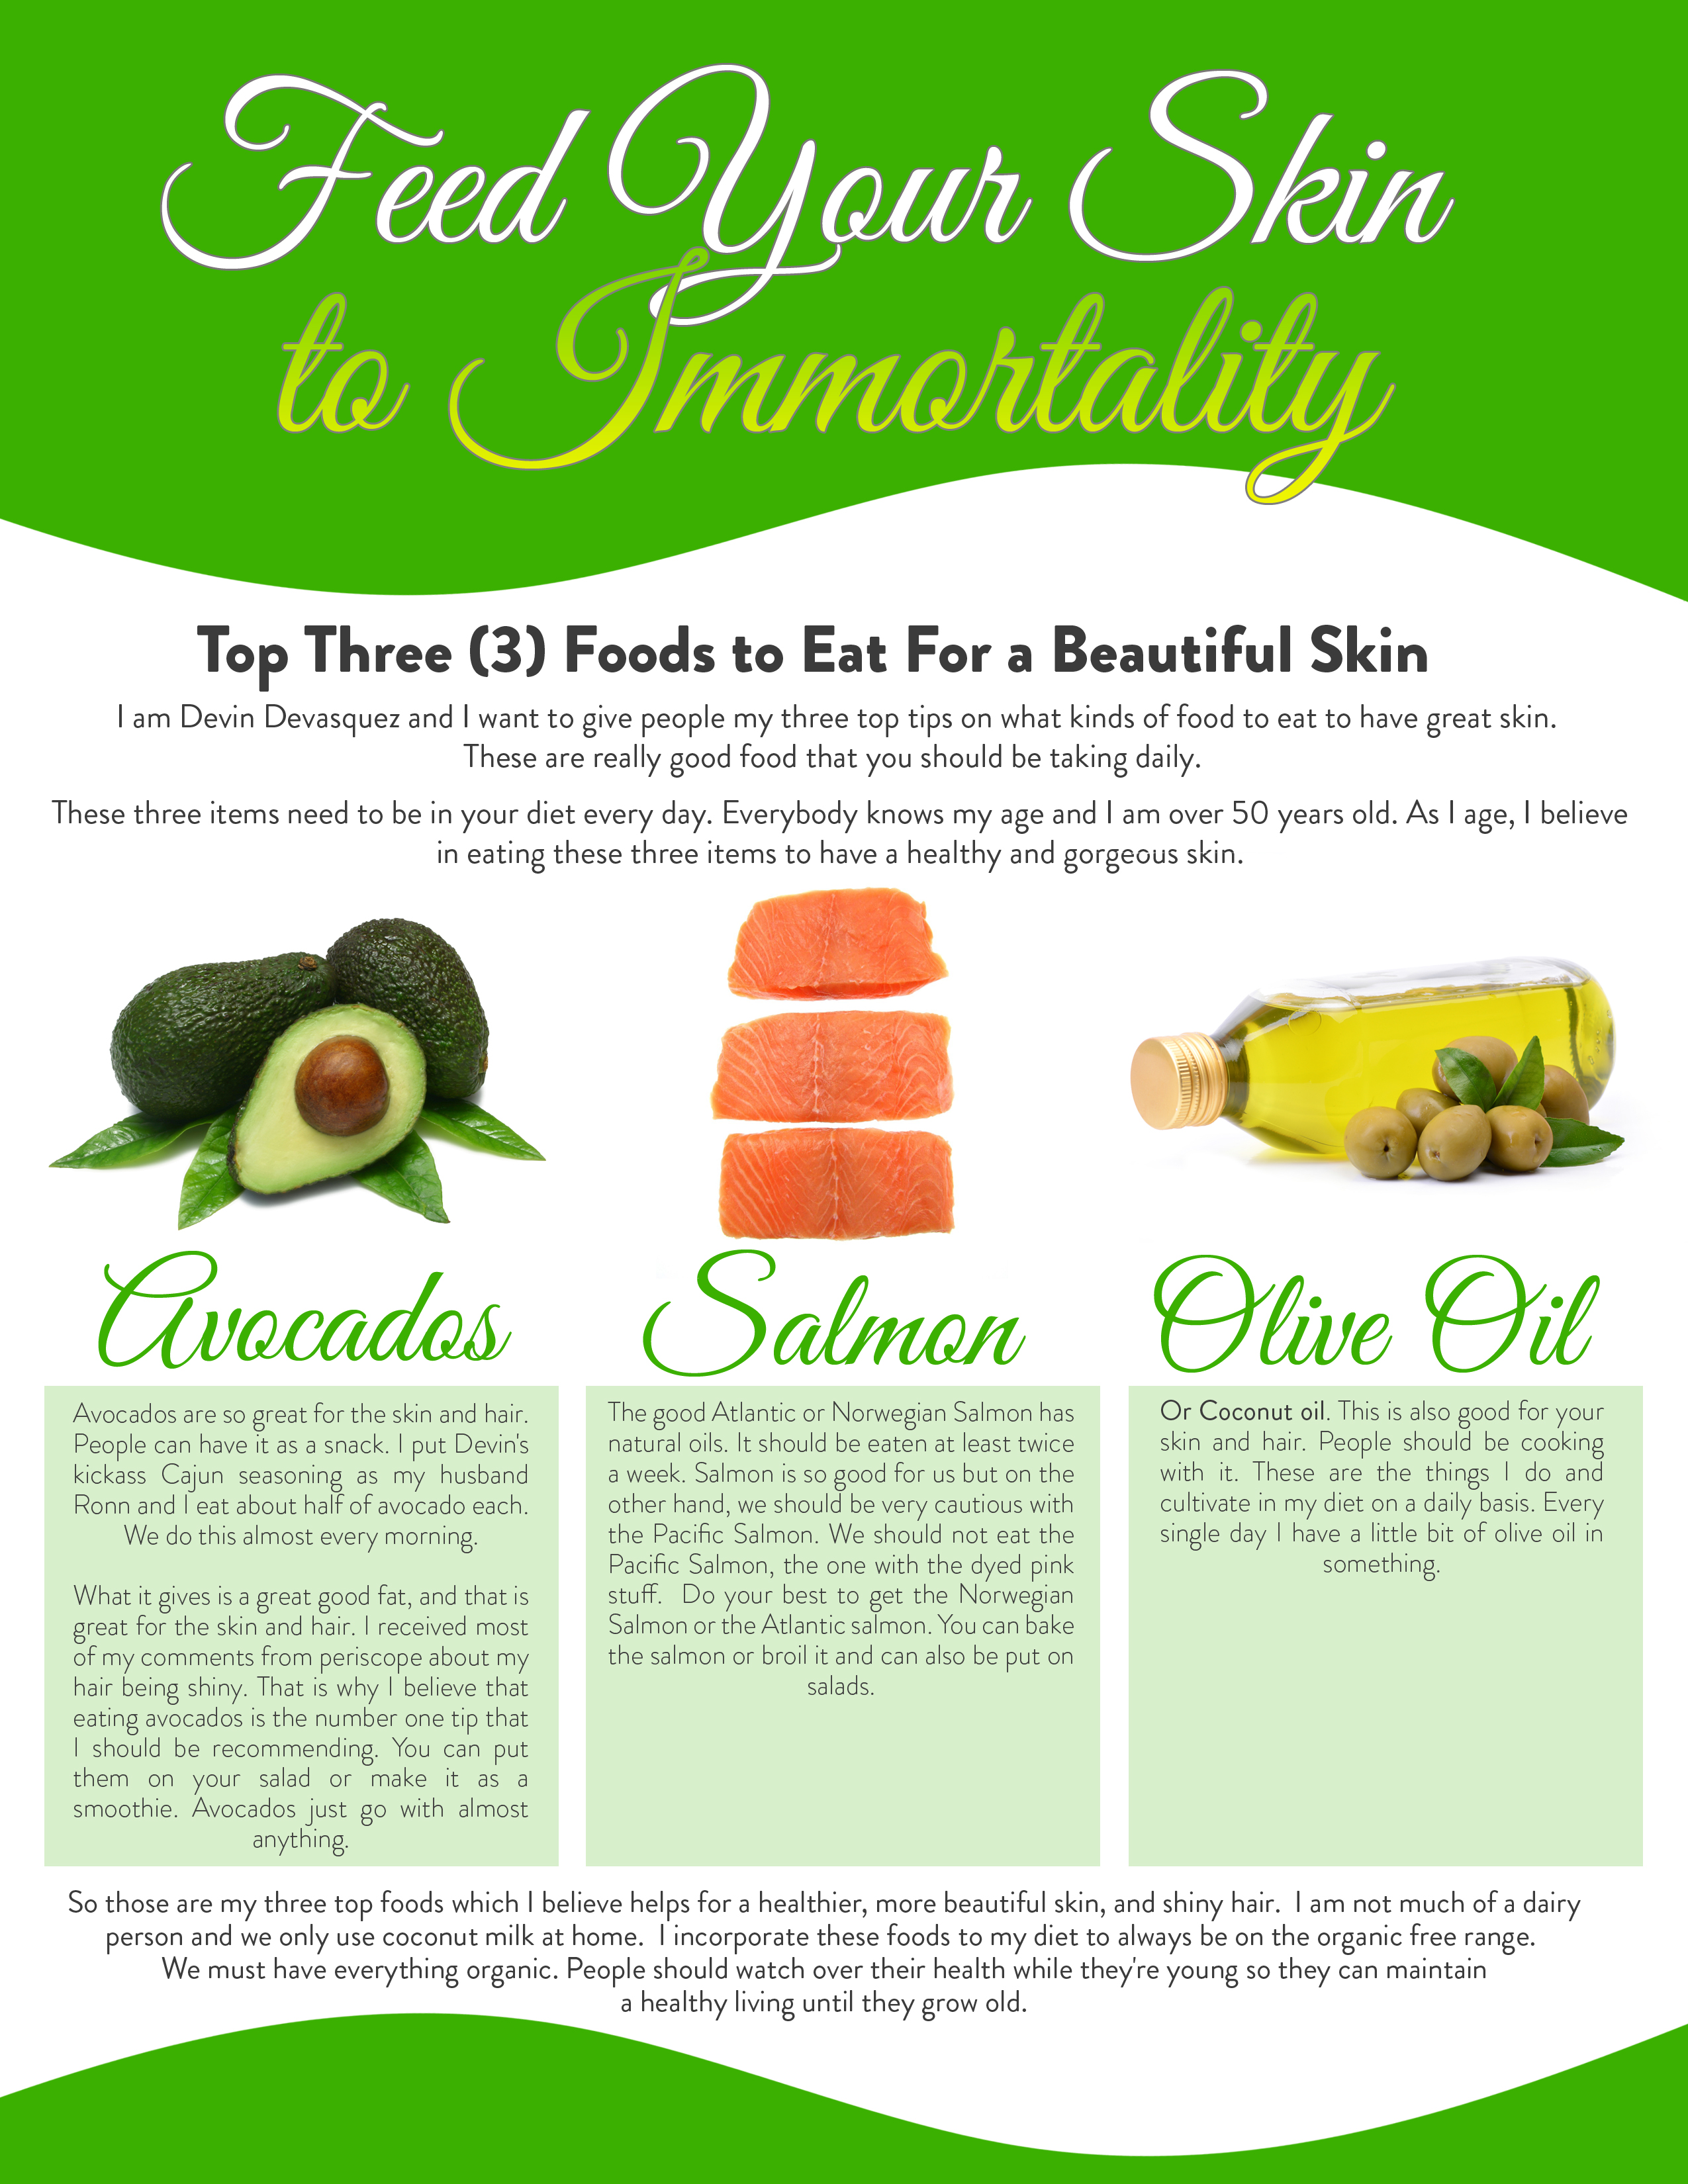 Top Three Foods to Eat For Beautiful Skin